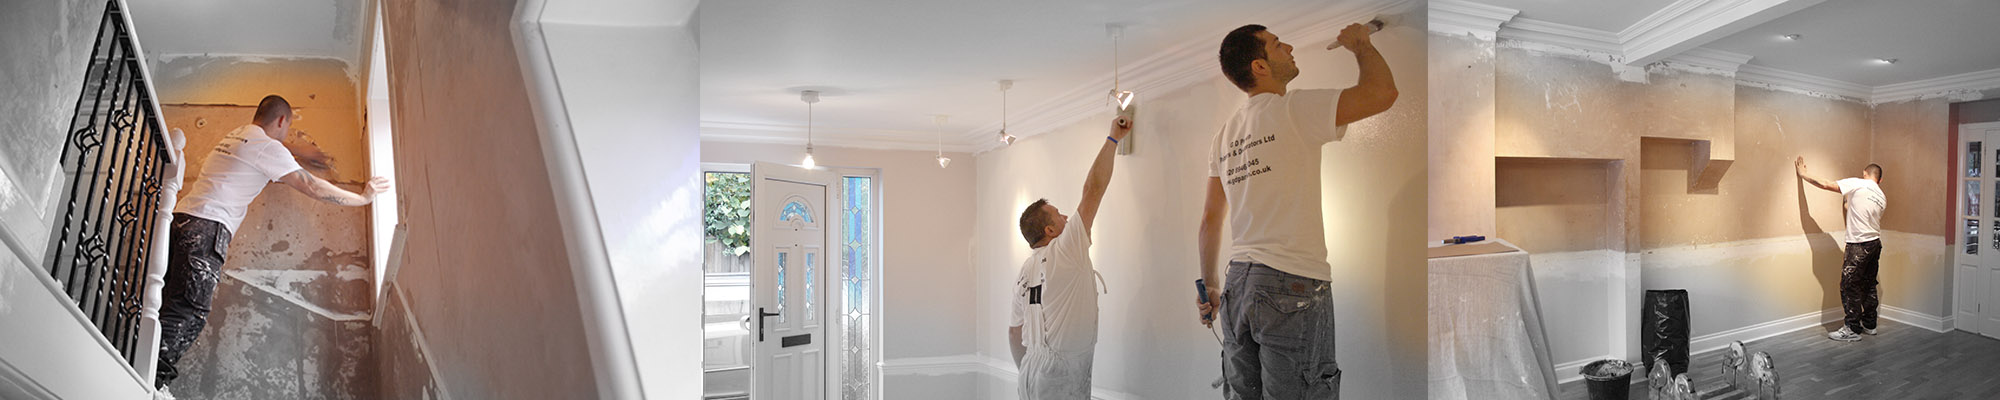 Top quality interior painting and decorating – London's Favourite ...